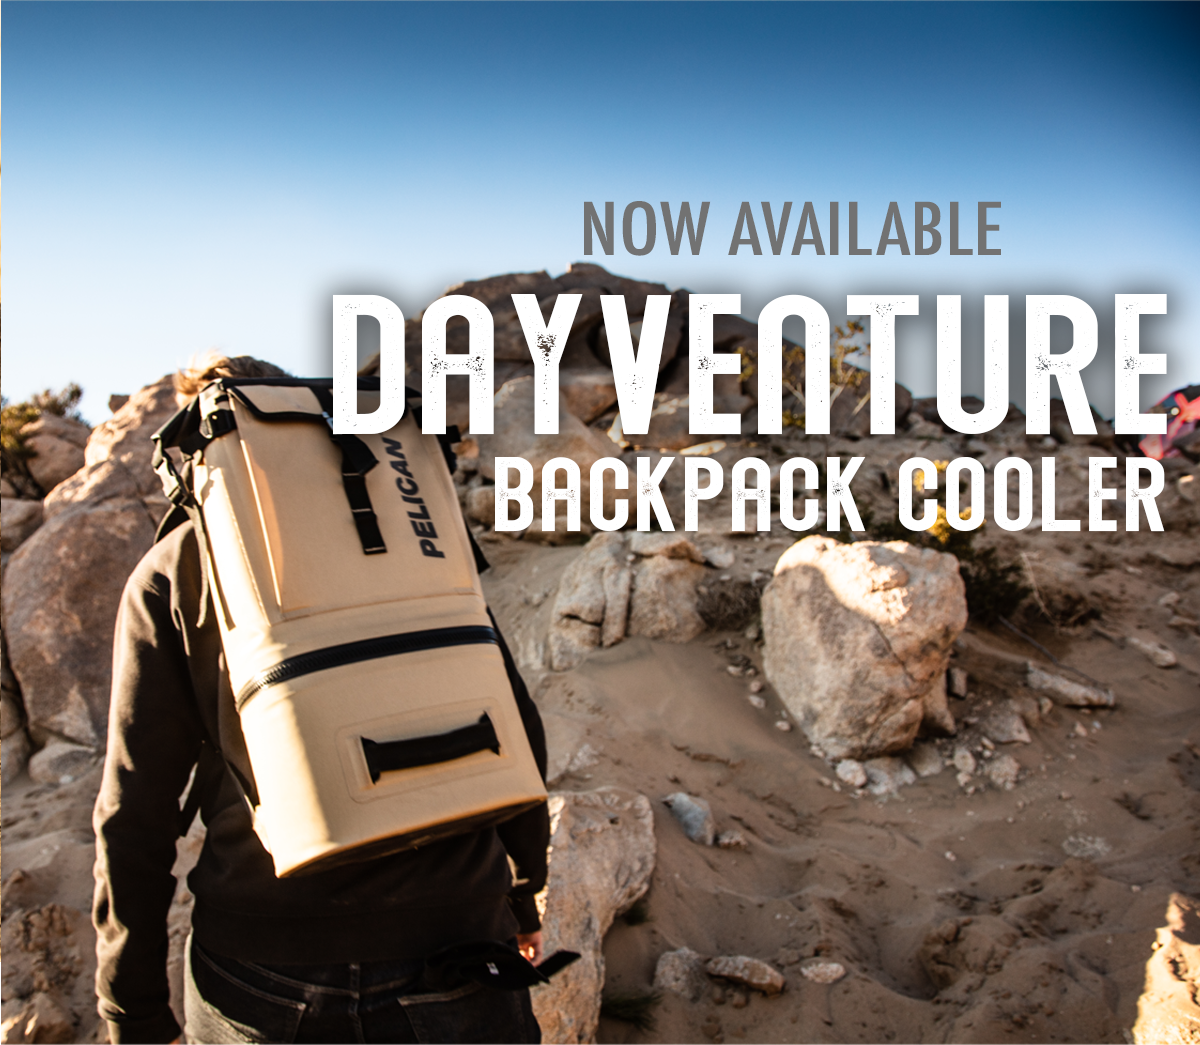 Now Available: Pelican Dayventure Backpack & Cooler